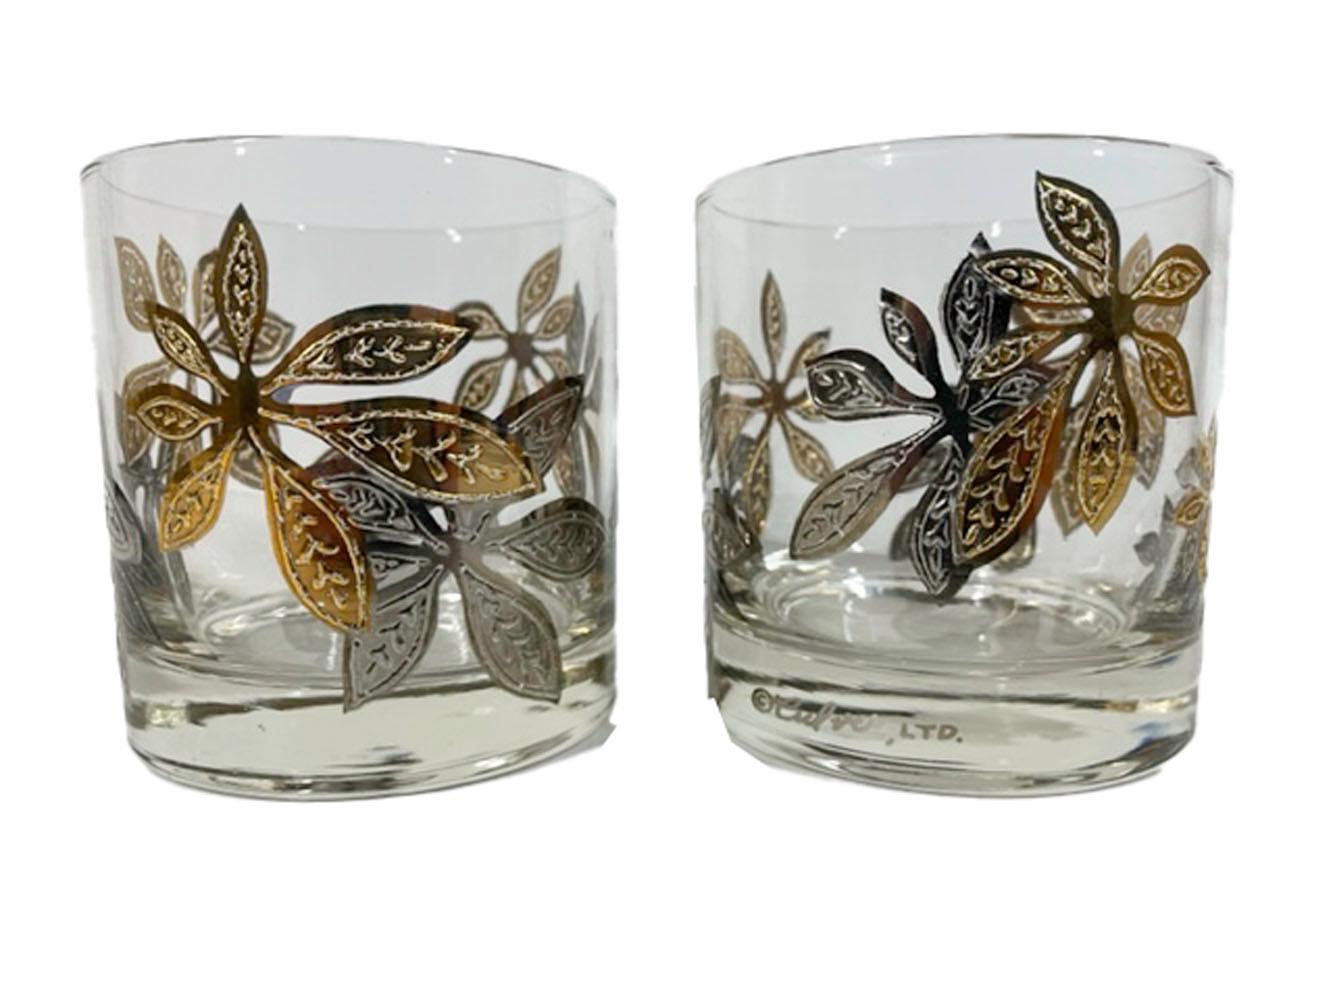 Mid-Century Modern Rocks Glasses by Culver, LTD. with Leaves in Gold and Silver For Sale 1